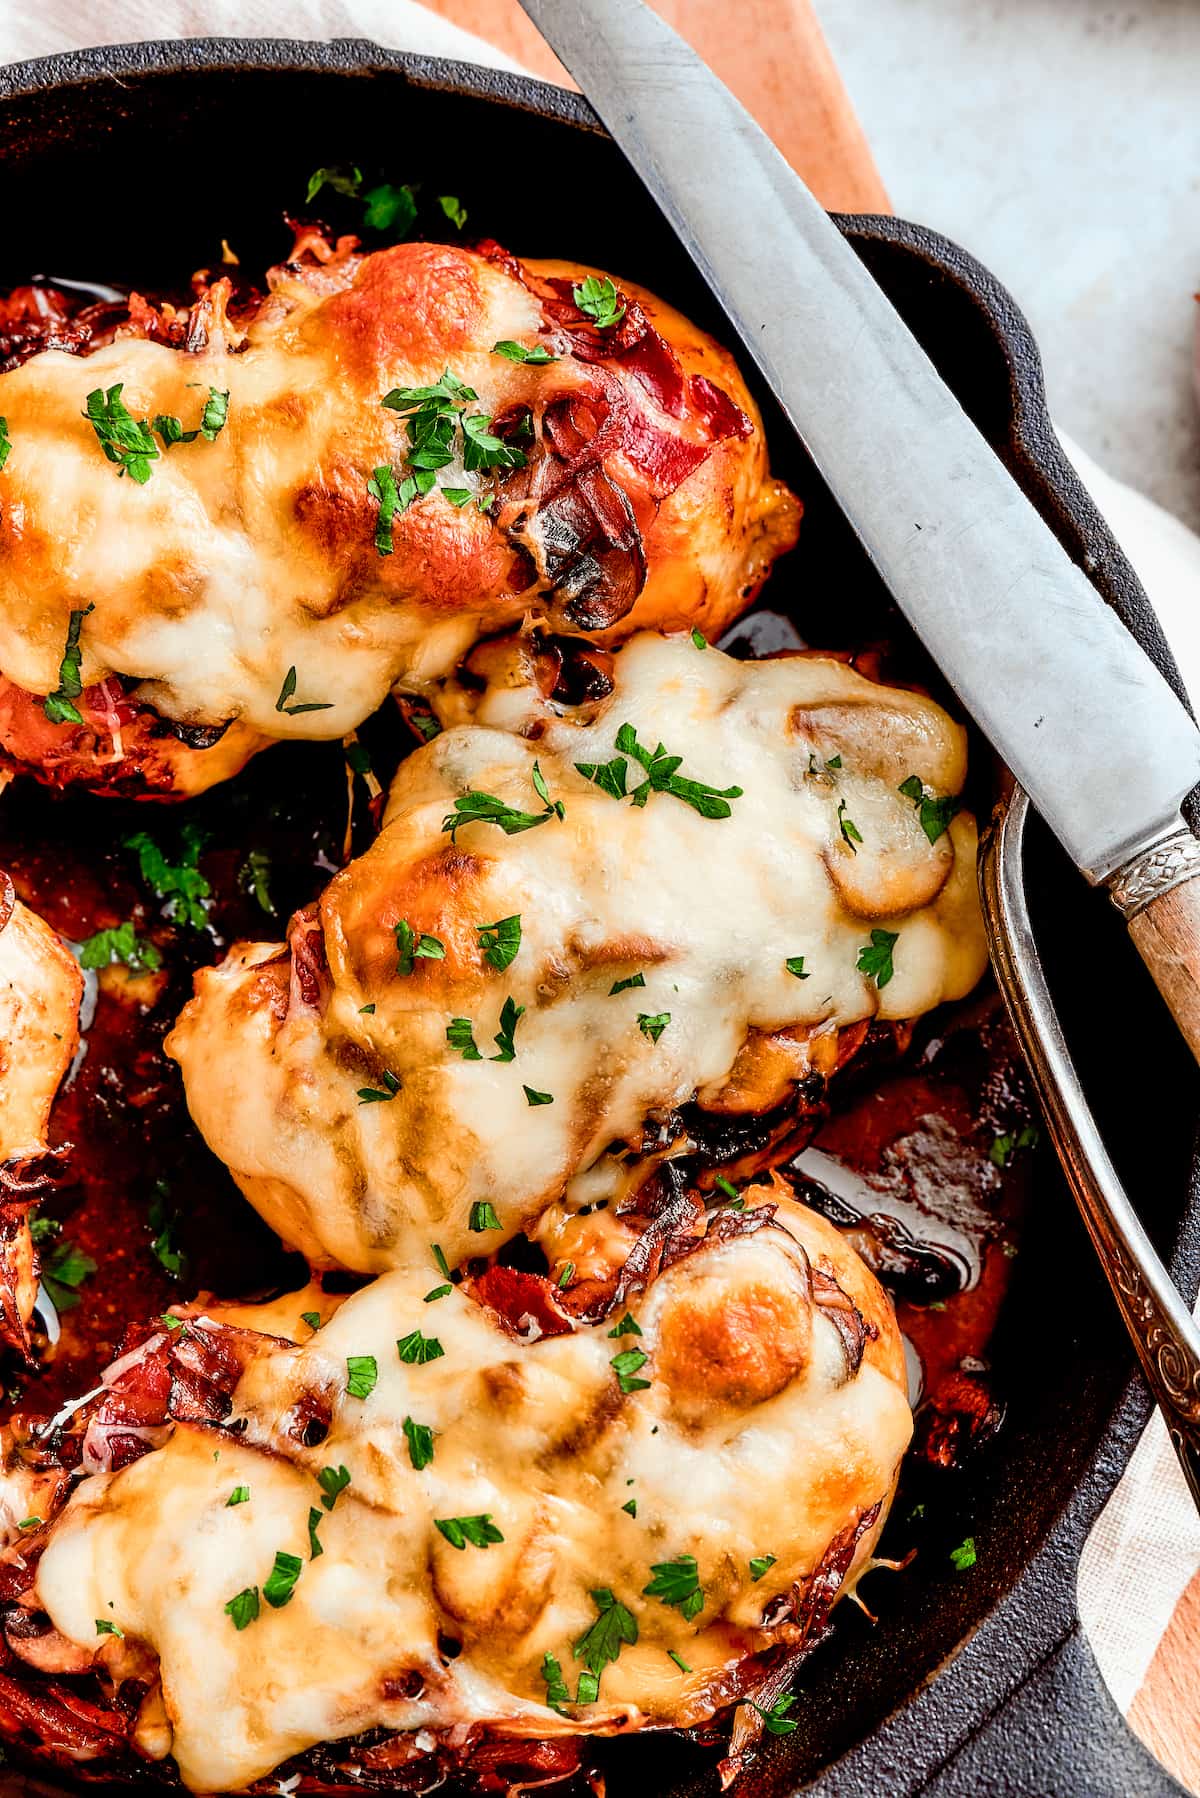 A skillet shows three chicken breasts topped with melted cheese for Alice Springs chicken.